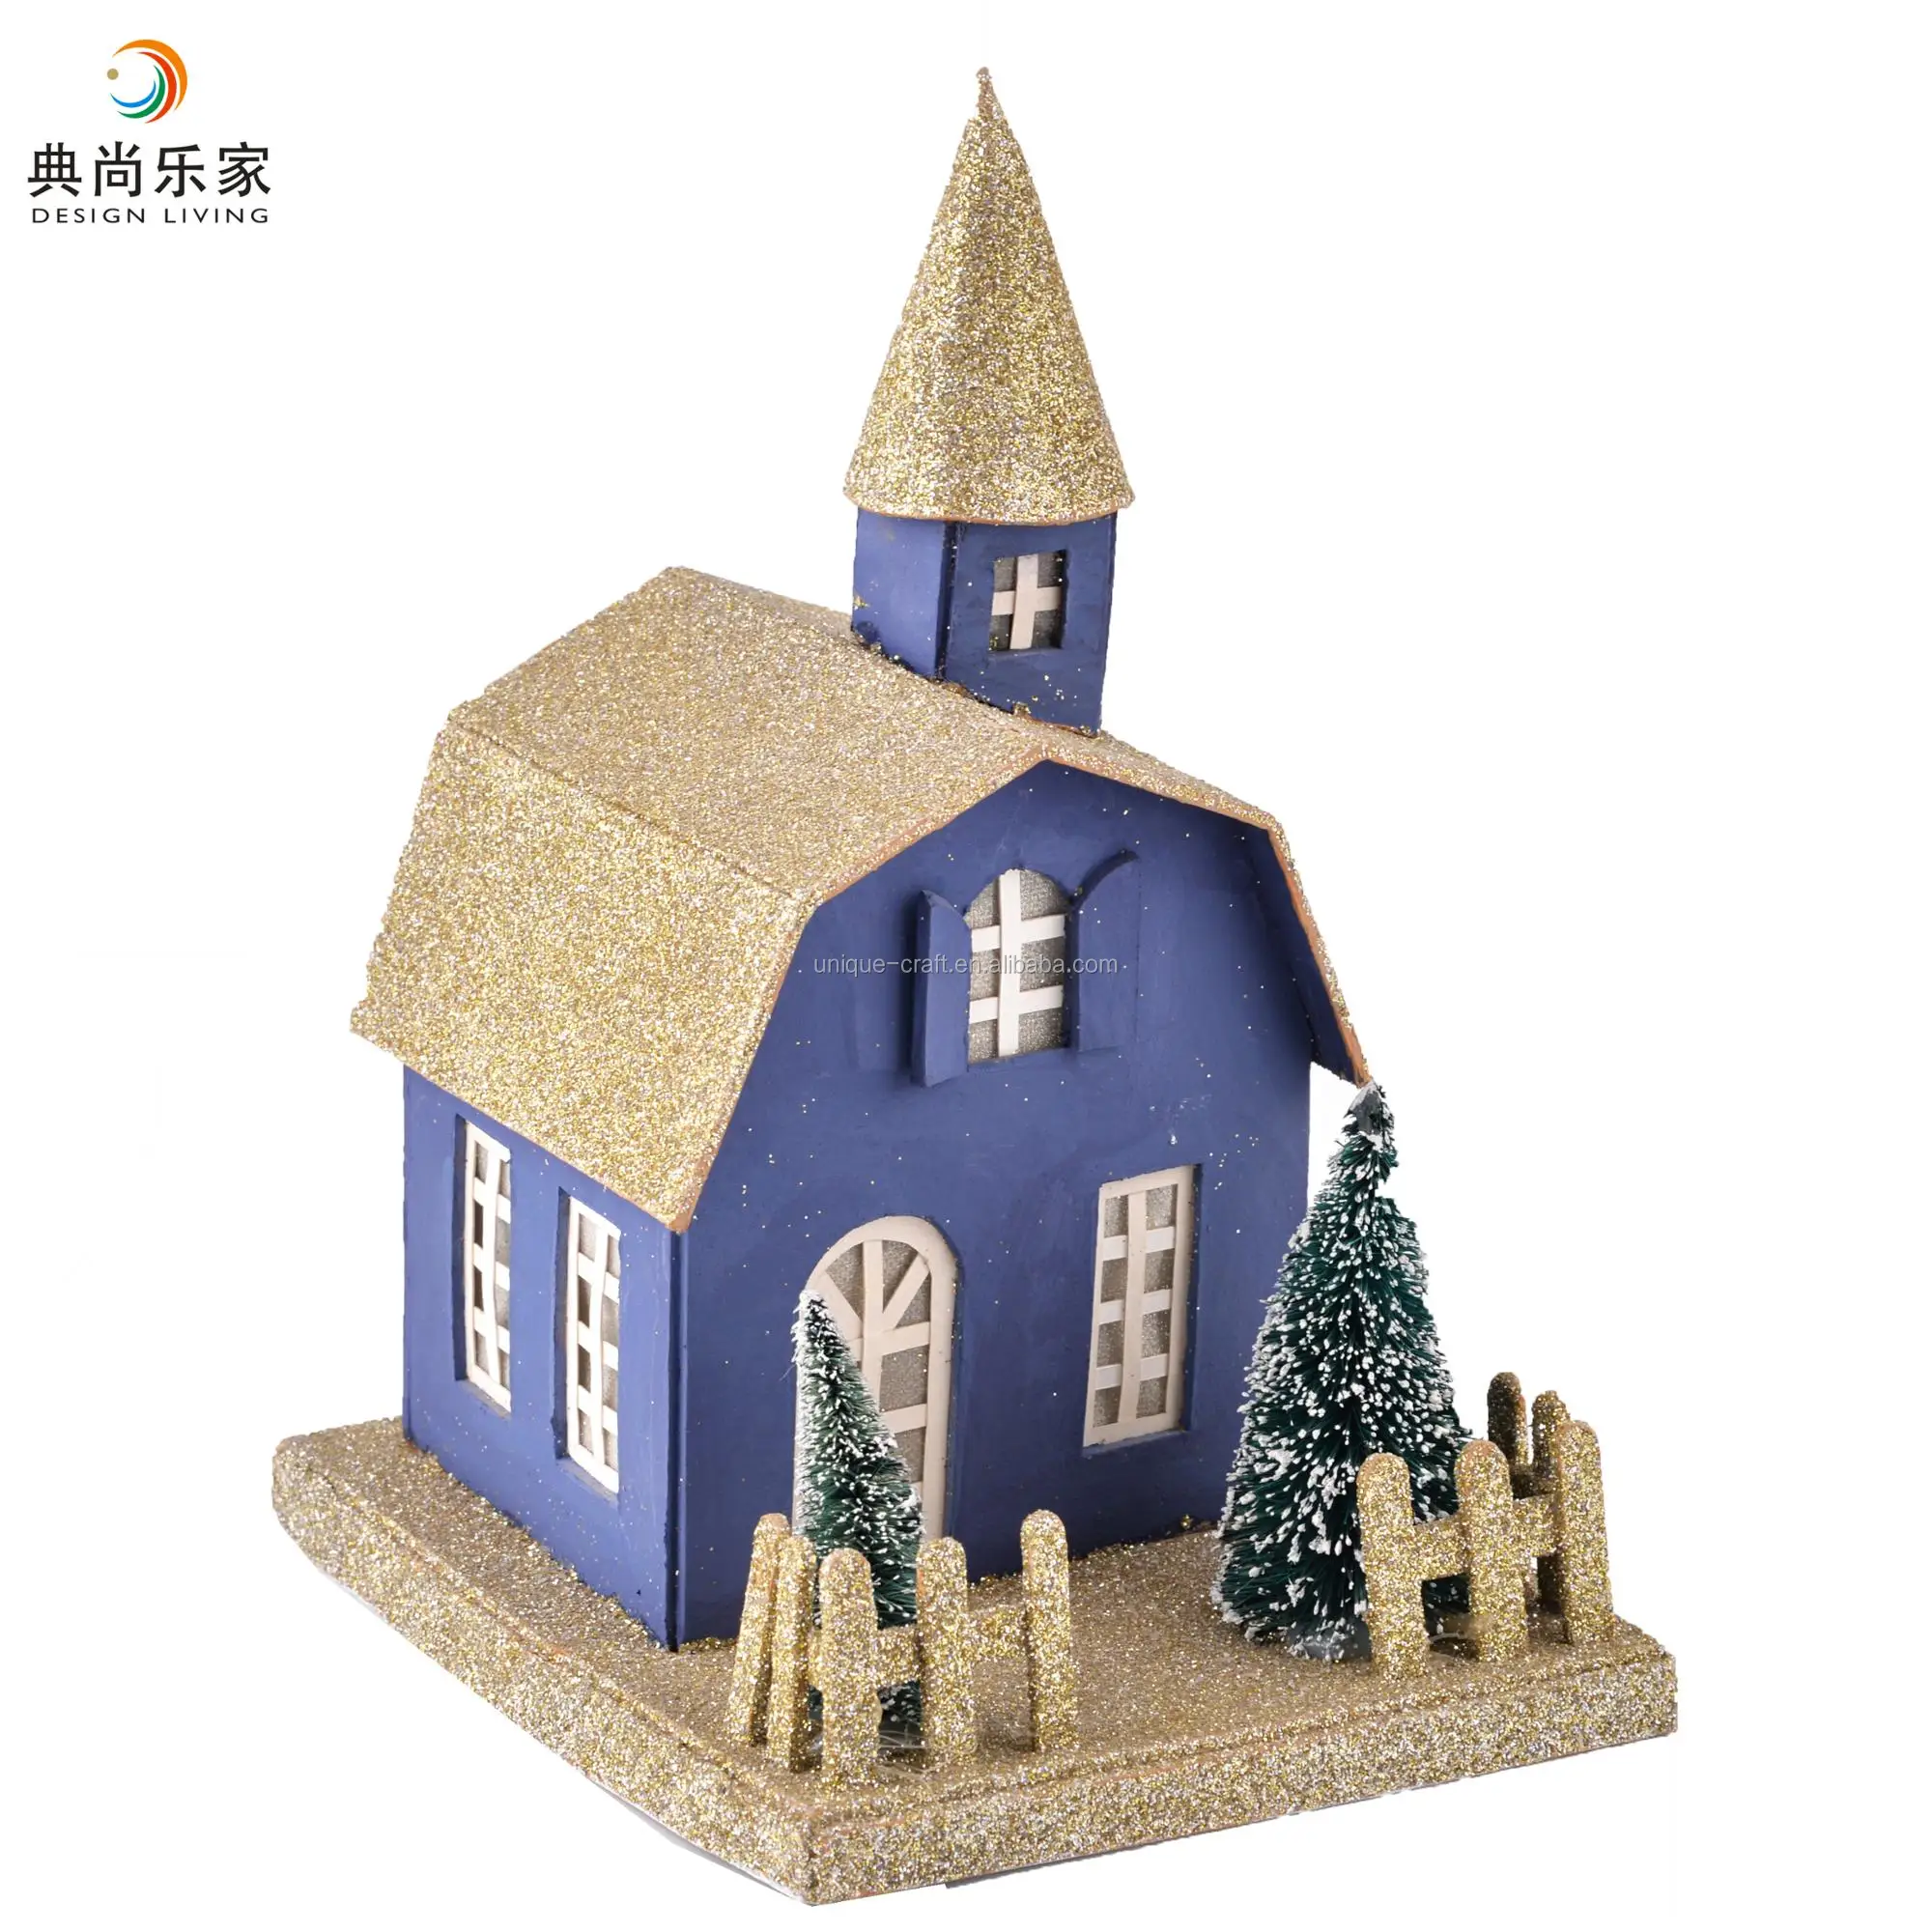 House Shaped Christmas Ornaments Glittering Blue Gold Cheap Paper Village Houses